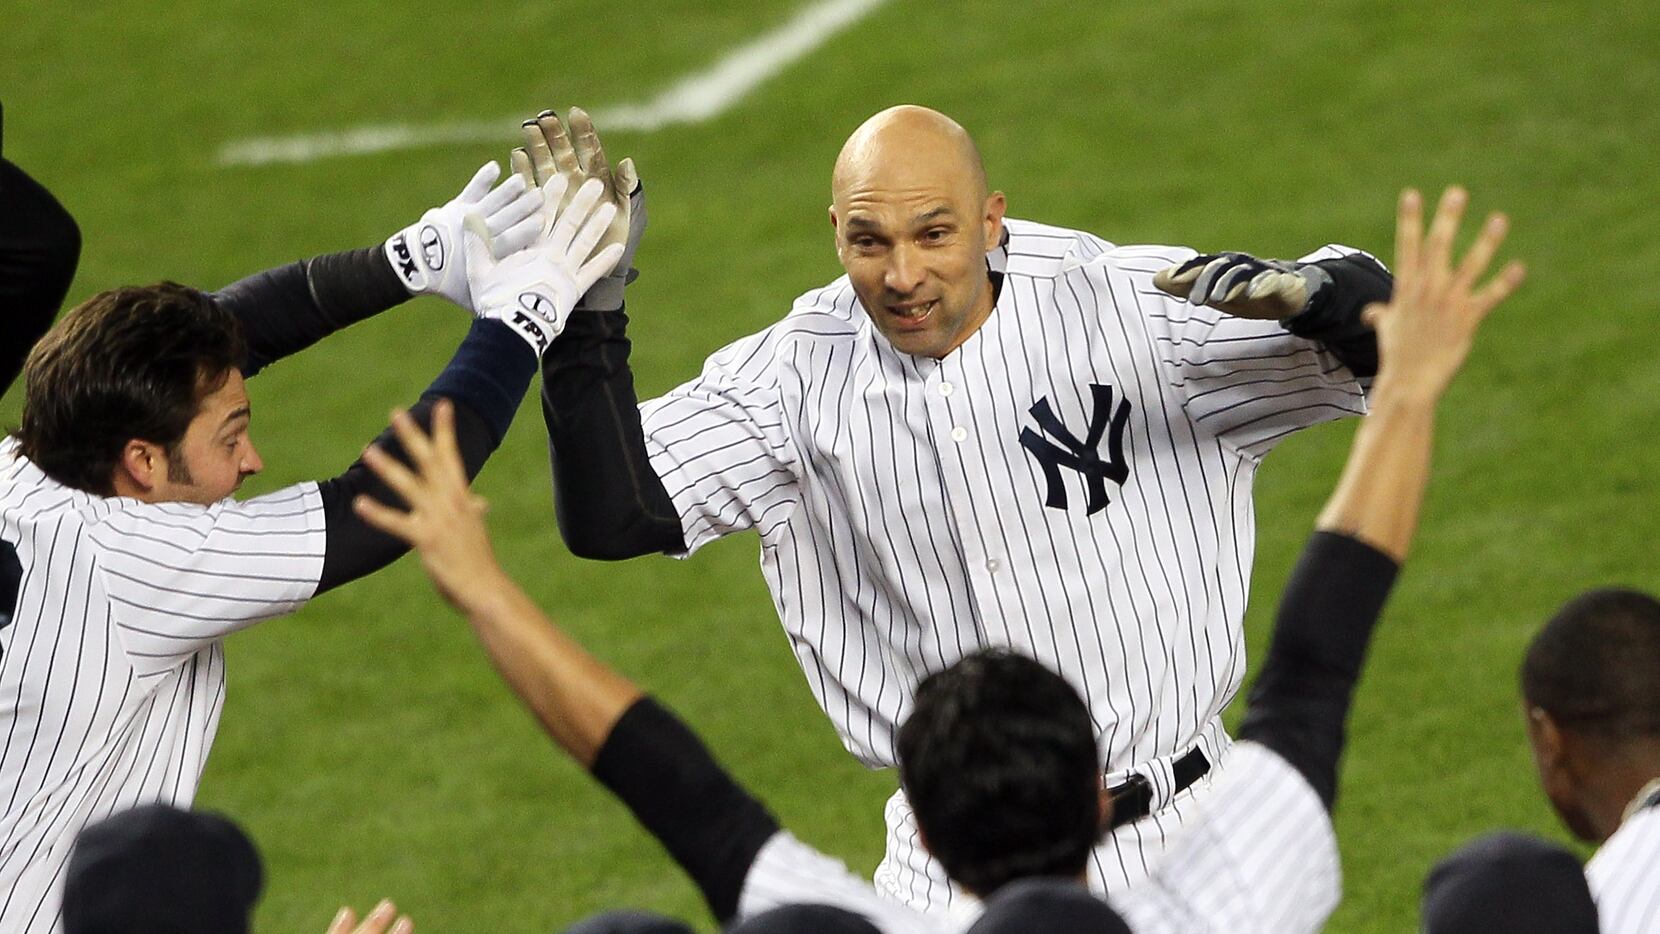 New York Yankees Agree to 1-Year Deal with LF Raul Ibanez